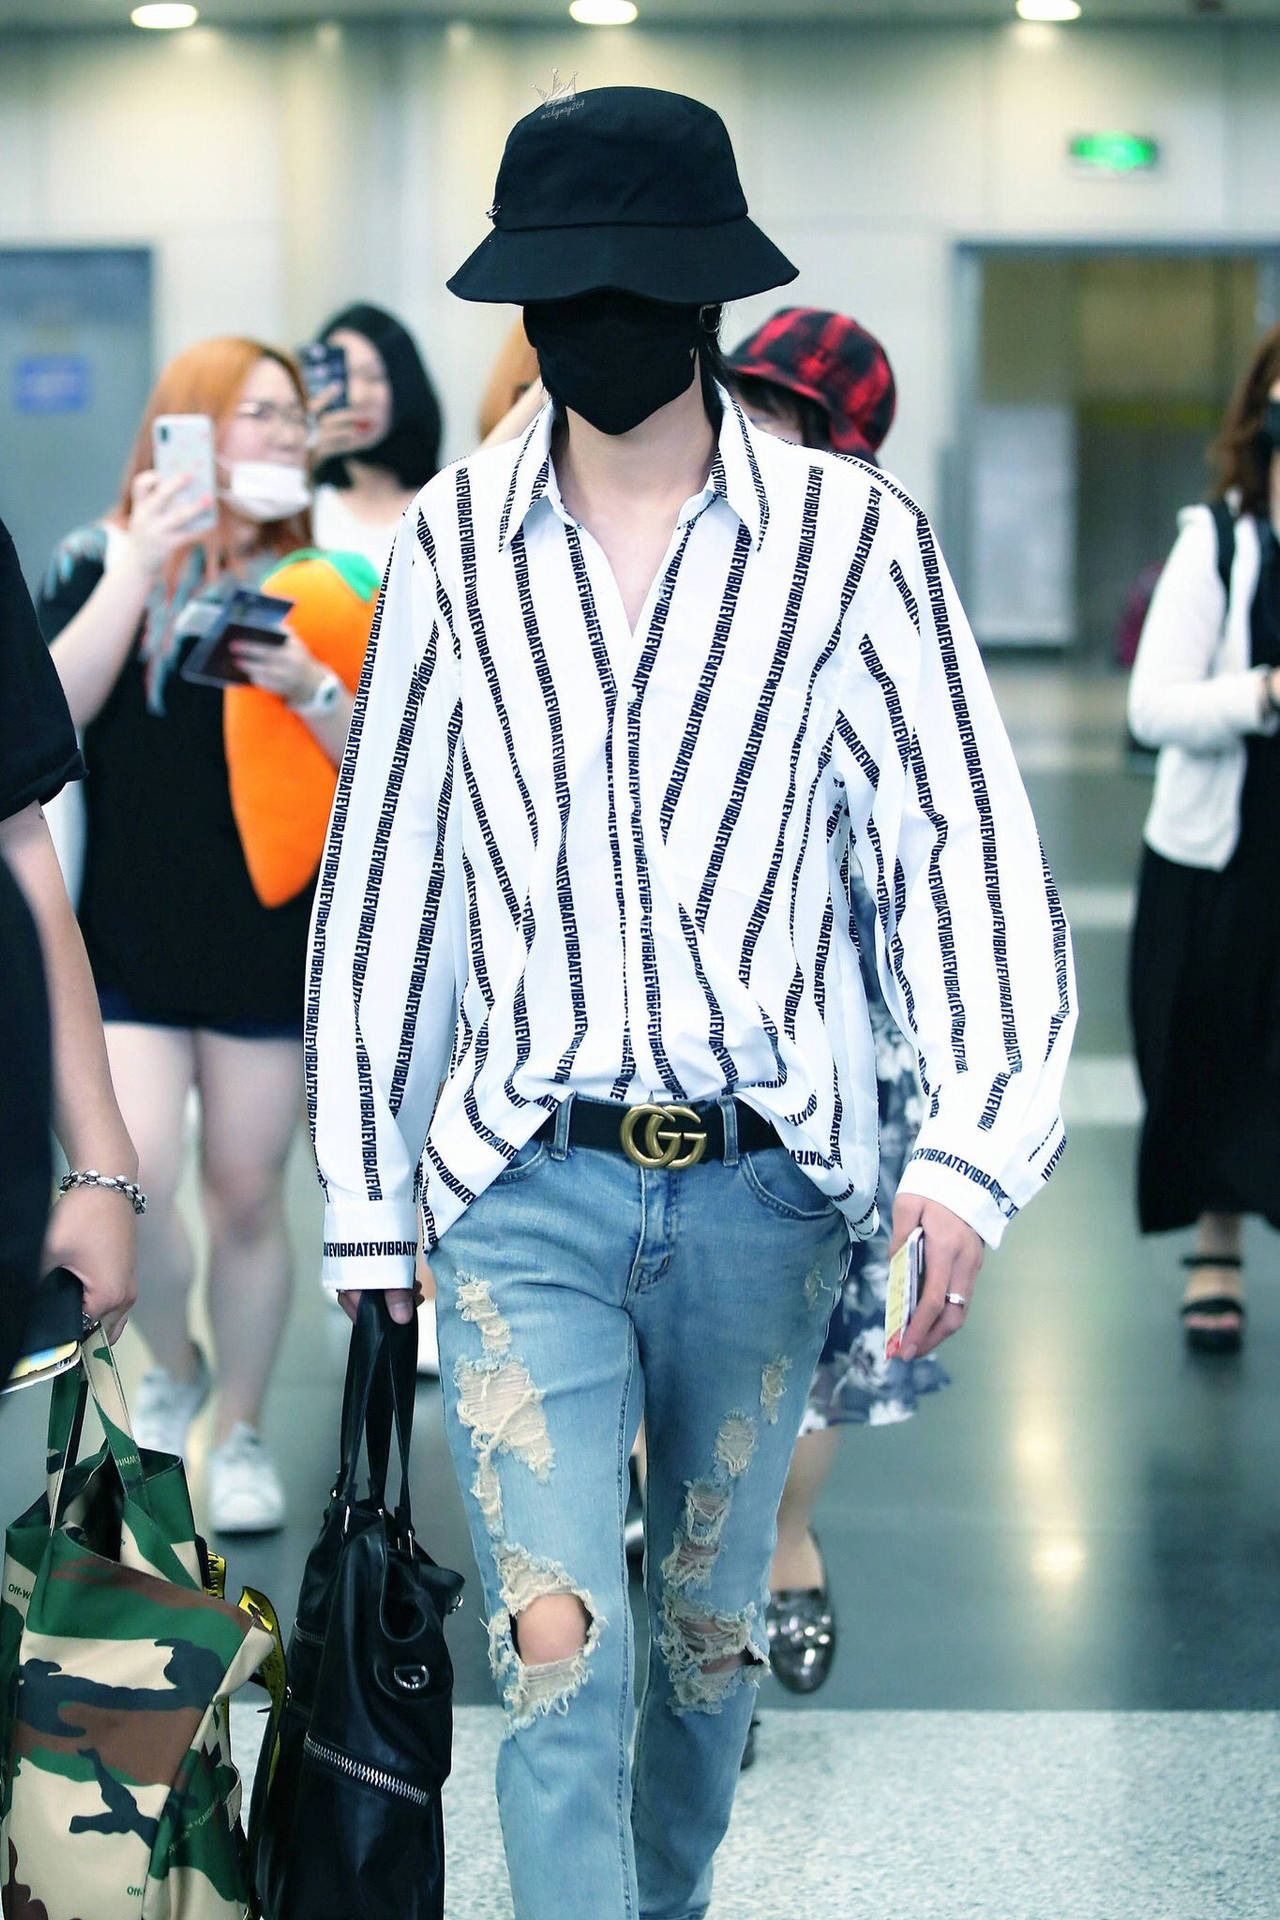 Fashion-forward K-pop Artist: 'the8' At The Airport Background